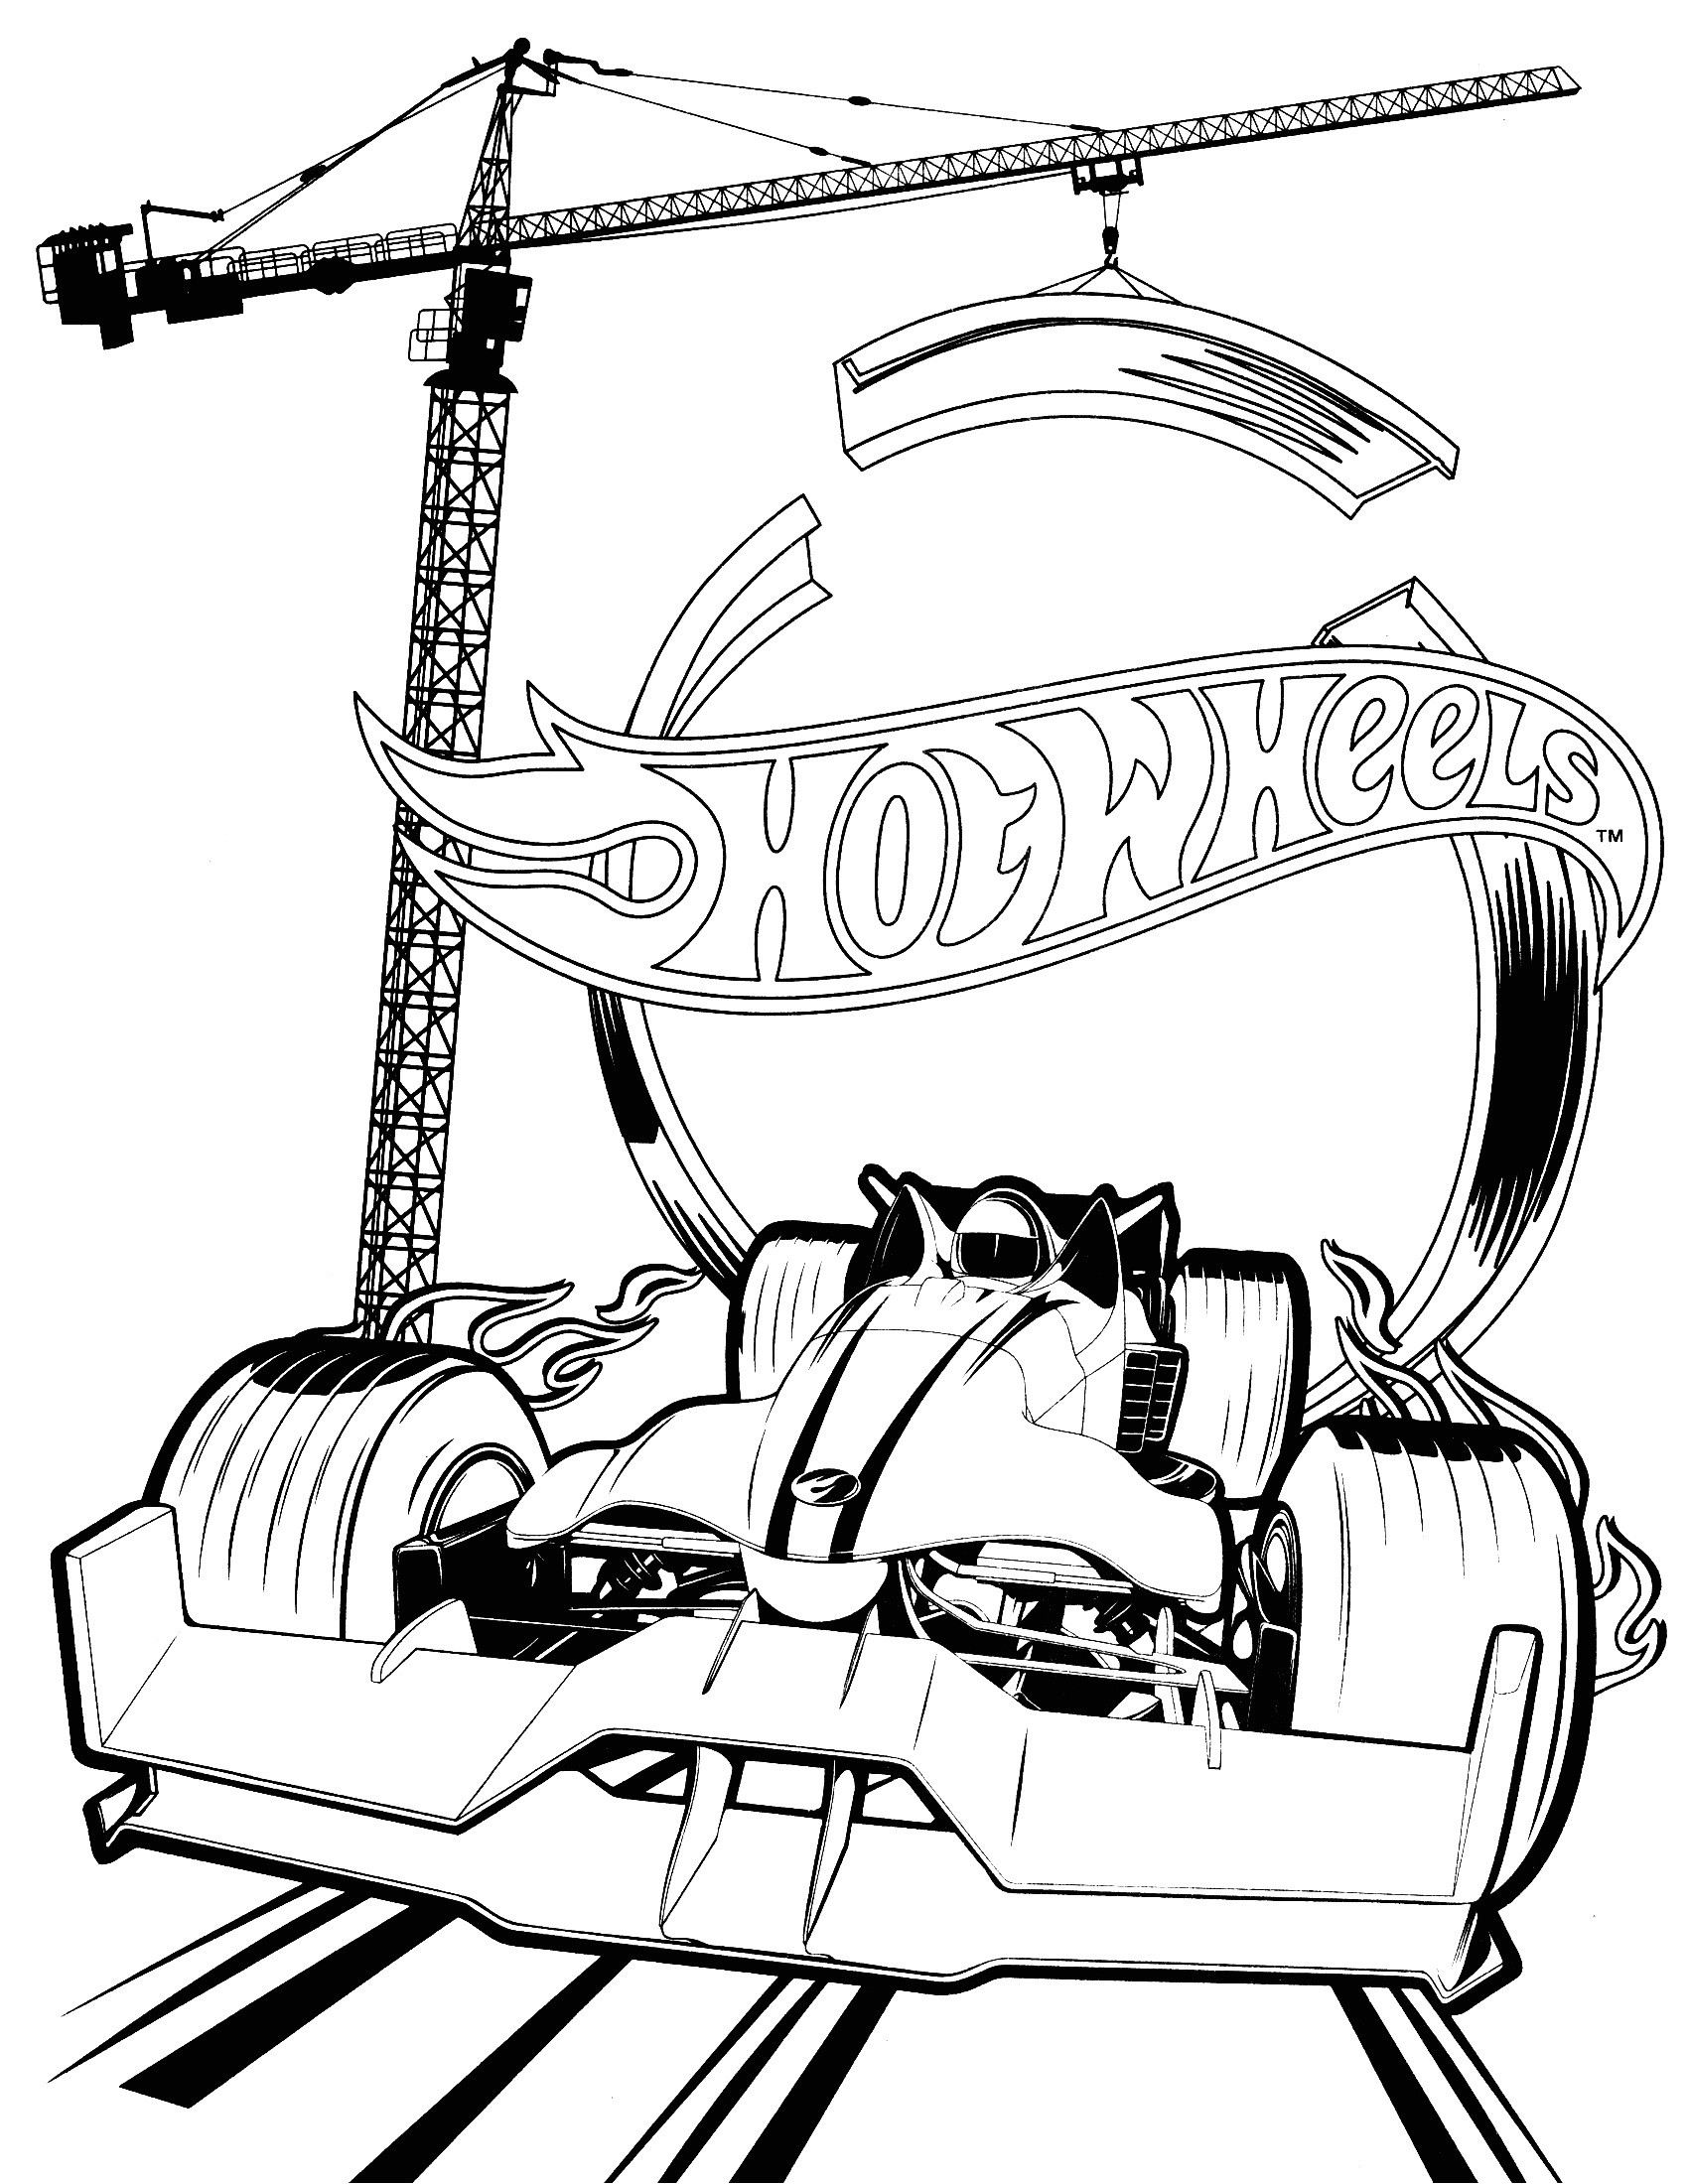 Hot Wheels Coloring Pages Awesome Ferrari Coloring Pages Fresh Team Hot Wheels Coloring Pages 1 B S